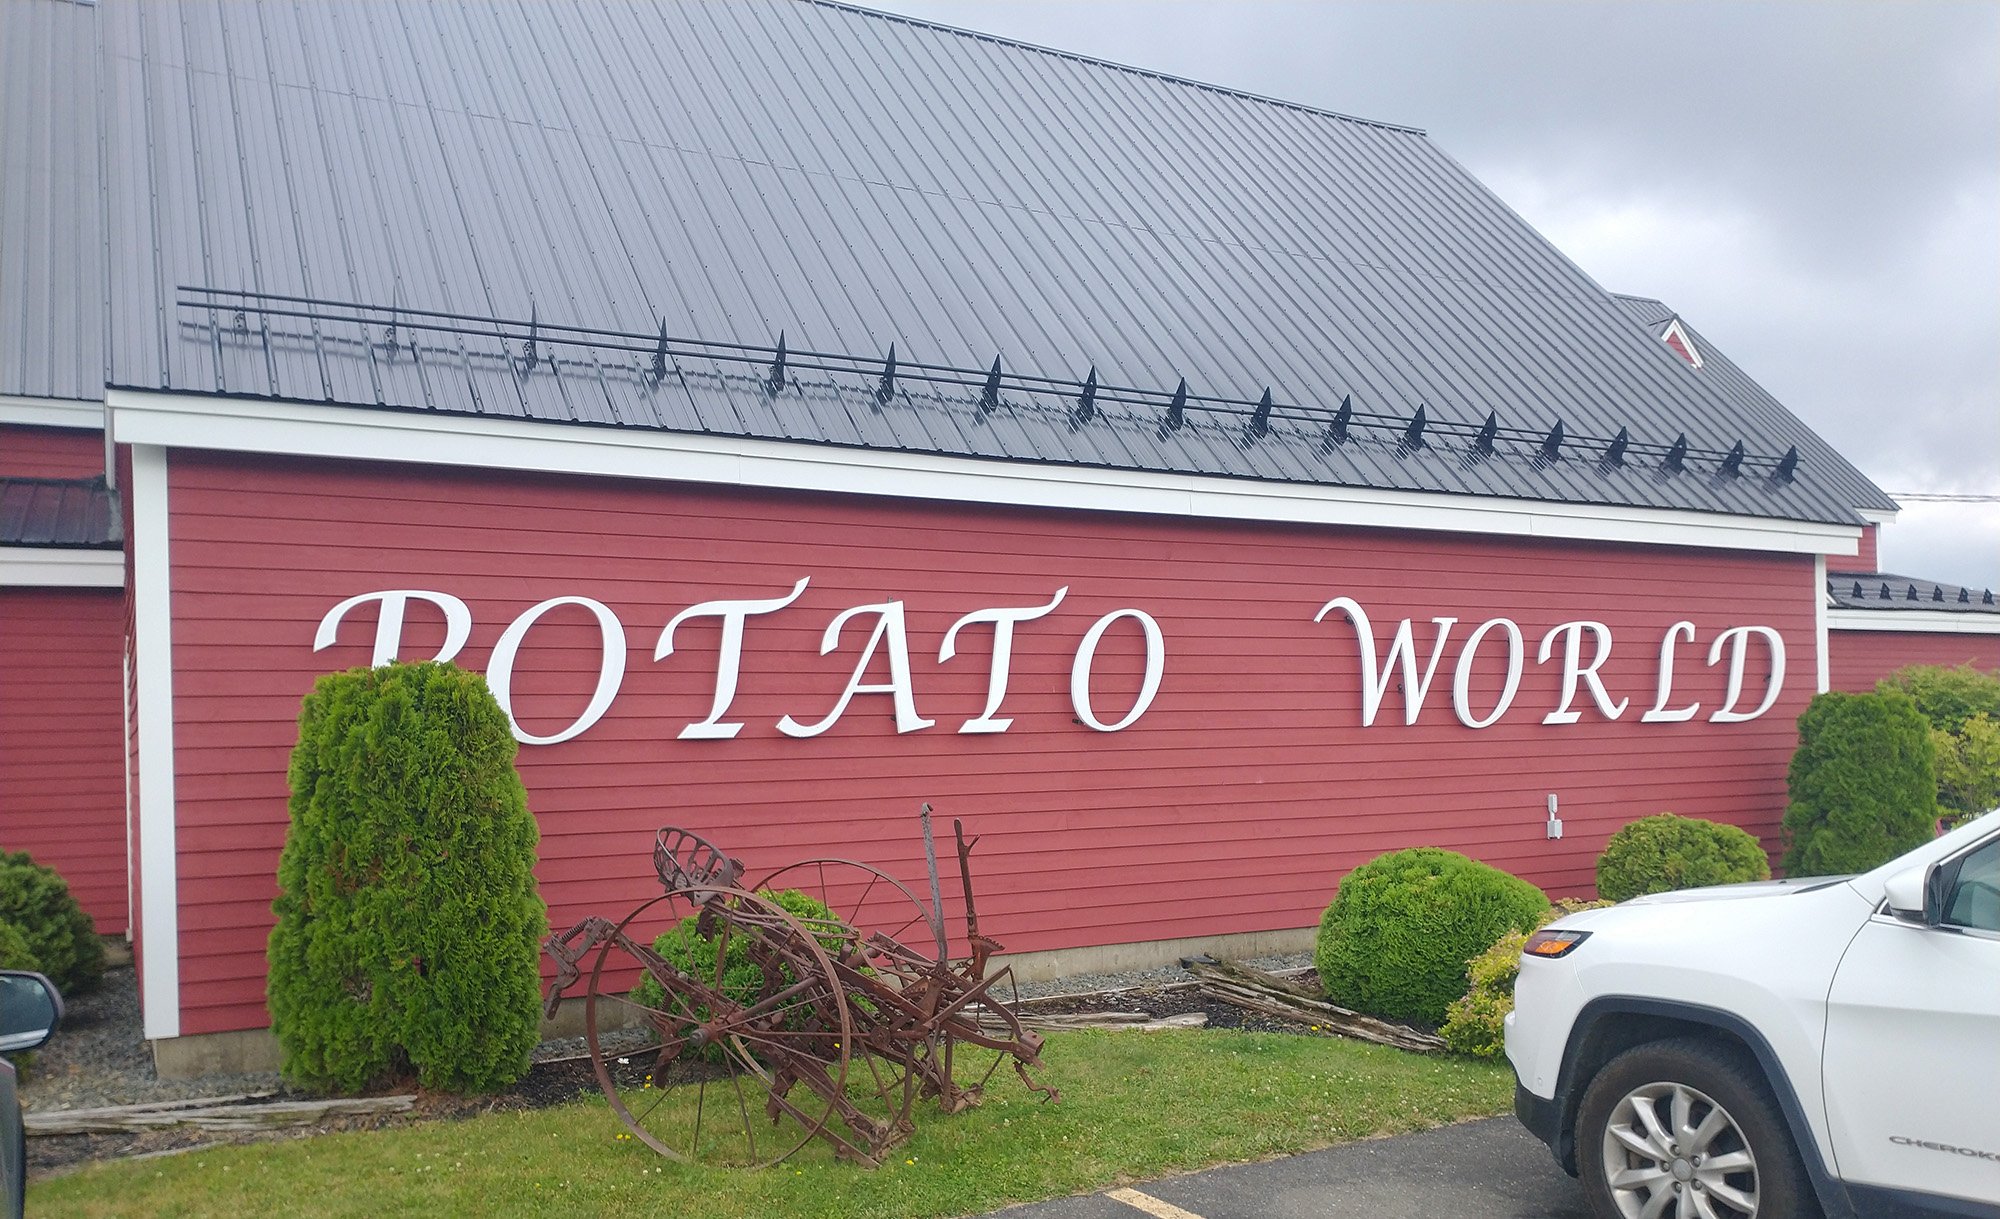 Had to stop at Potato World when I saw the signs on the highway. It's a museum. About potatoes.